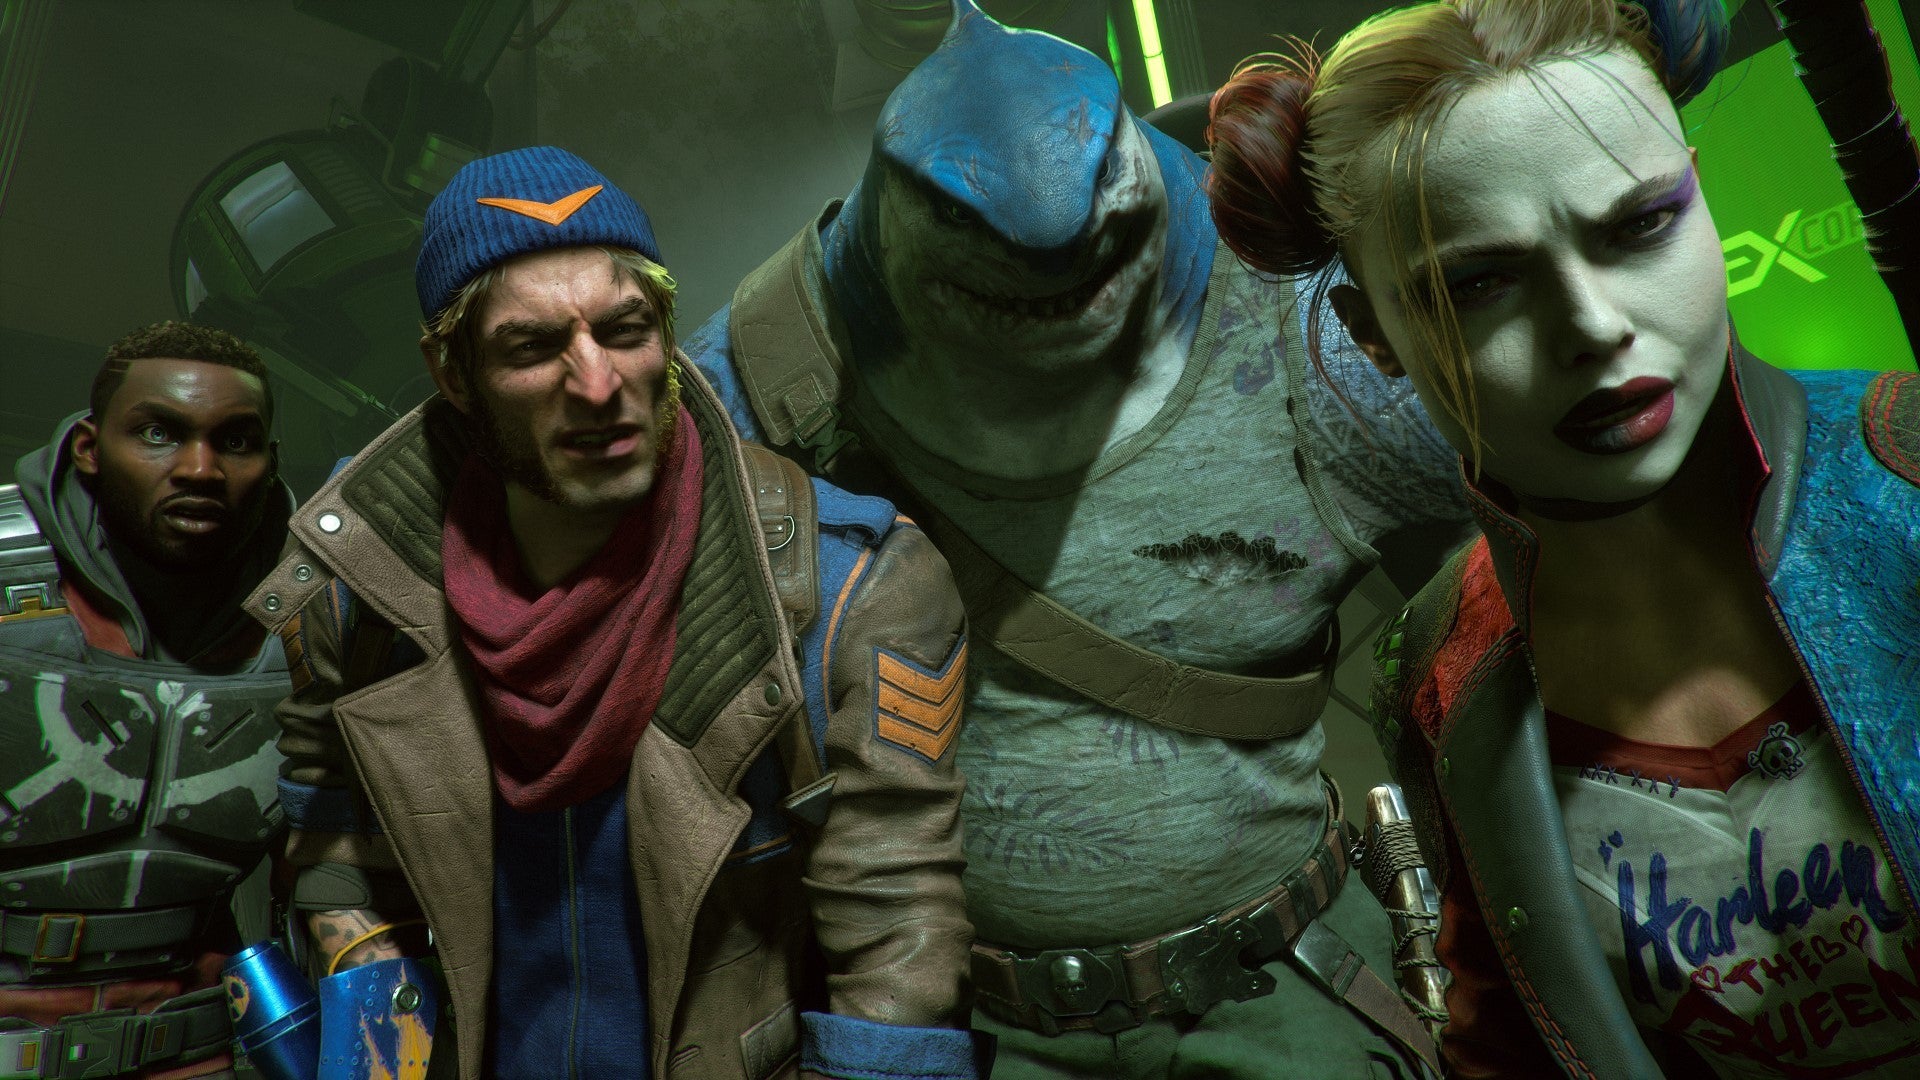 A dynamic team shot in close-up of Deadshot, Captain Boomerang, King Shark, and Harley Quinn in Suicide Squad: Kill the Justice League.